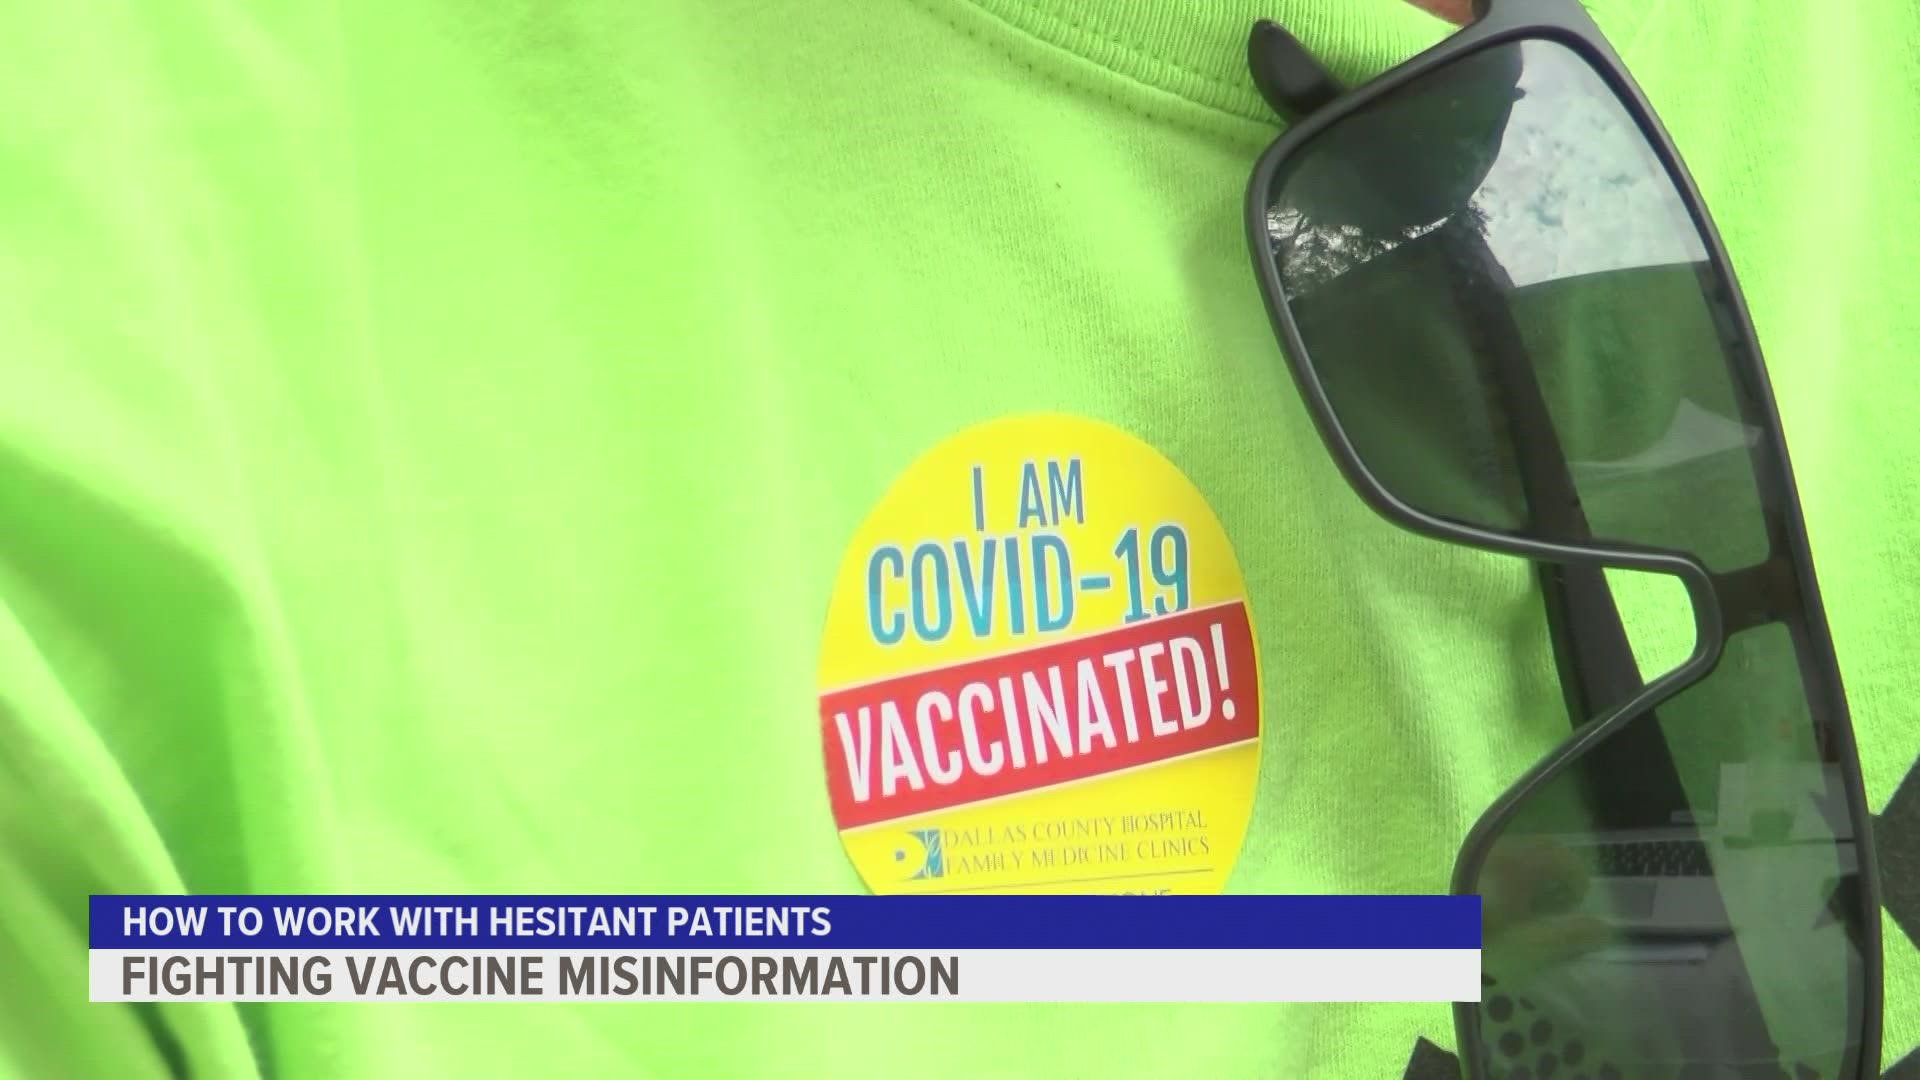 Perry's Latino Festival gave attendees a chance to get their COVID vaccine—and talk to doctors one-on-one if they had concerns about the shot.